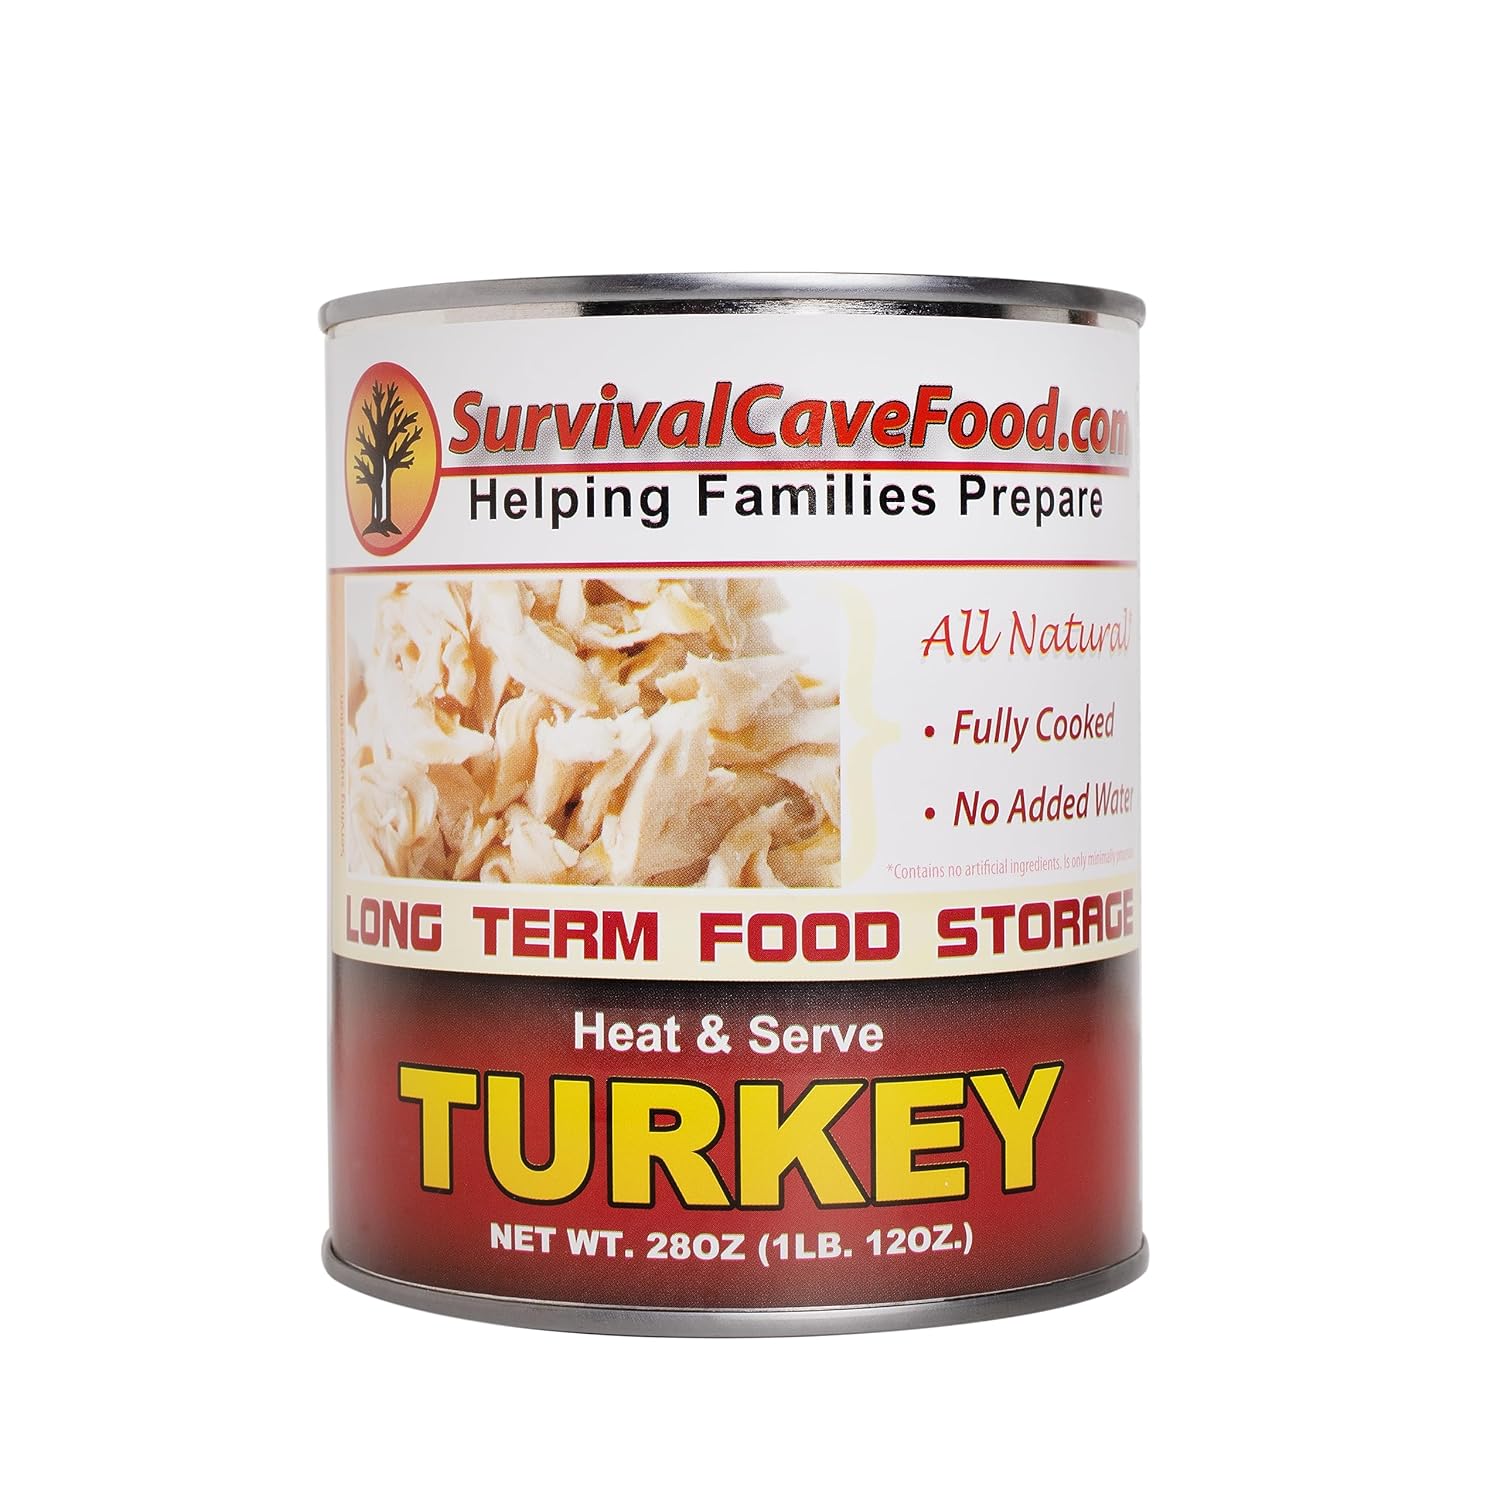 Survival Cave Food Canned Turkey 28oz can - Case of 12 Cans